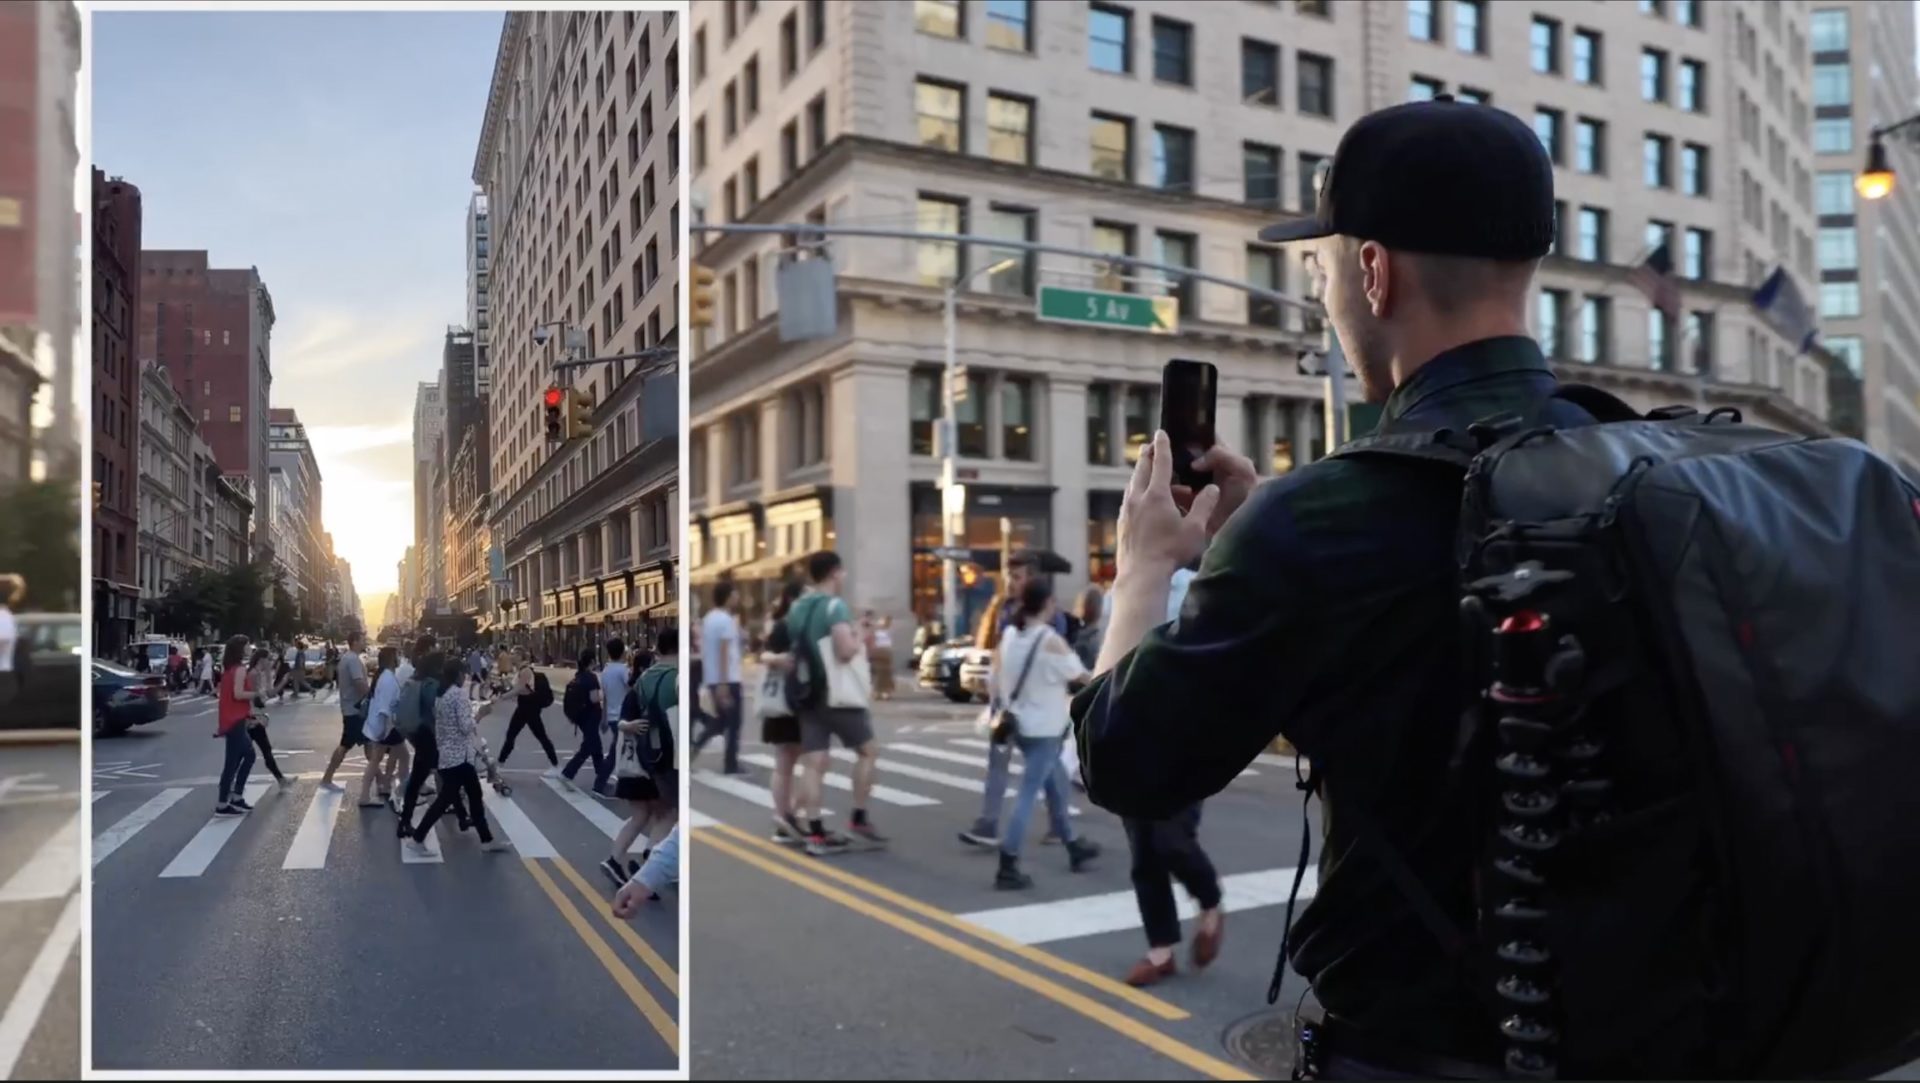 On the right side of the frame, instructor Max holds up his smartphone, obviously filming the New York City Street he’s standing on. On the right side of the frame, an inset shows the view of the street he has from his camera.